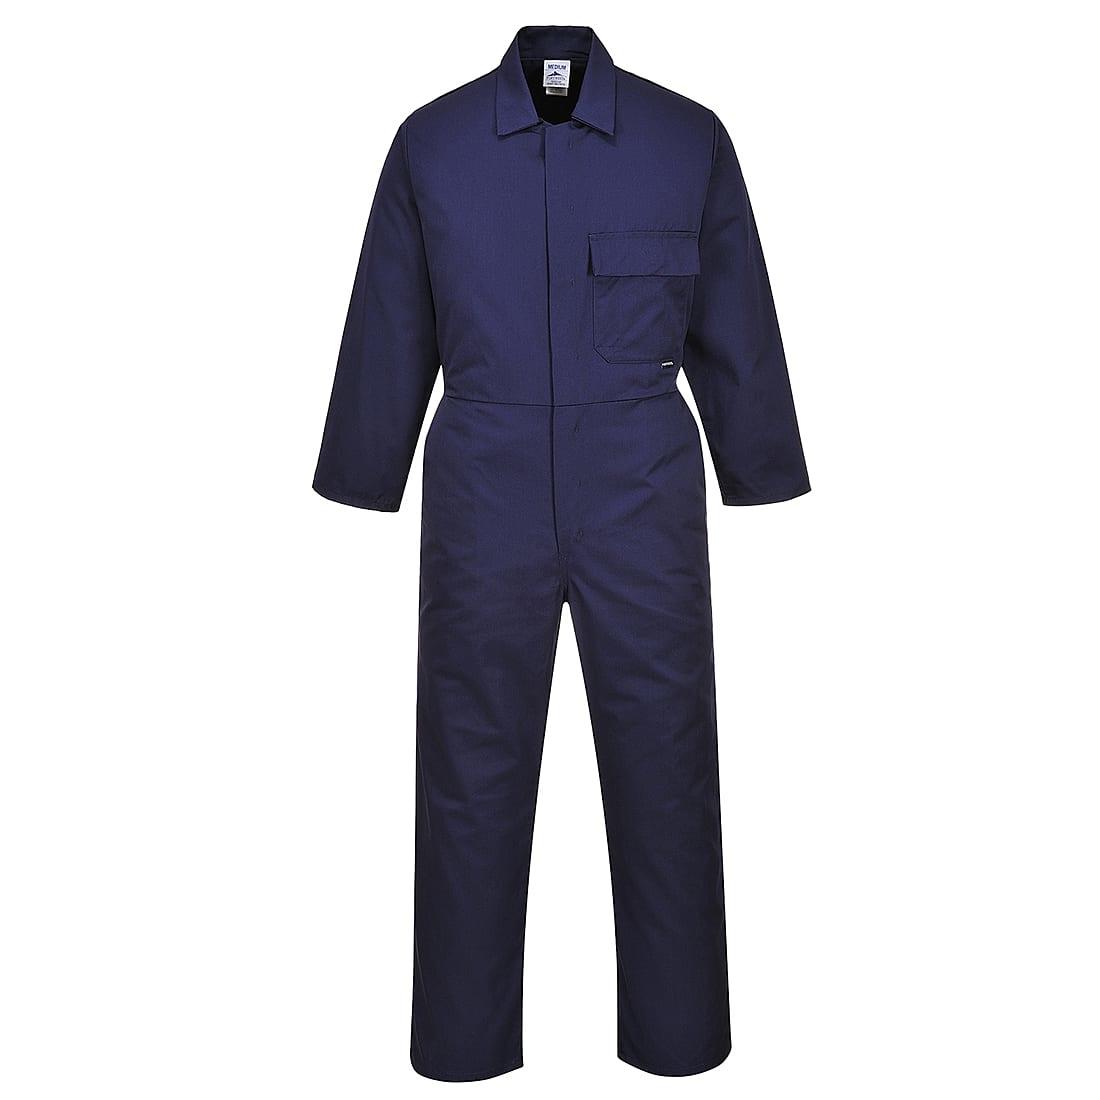 Portwest C802 Standard Coverall in Navy (Product Code: C802)